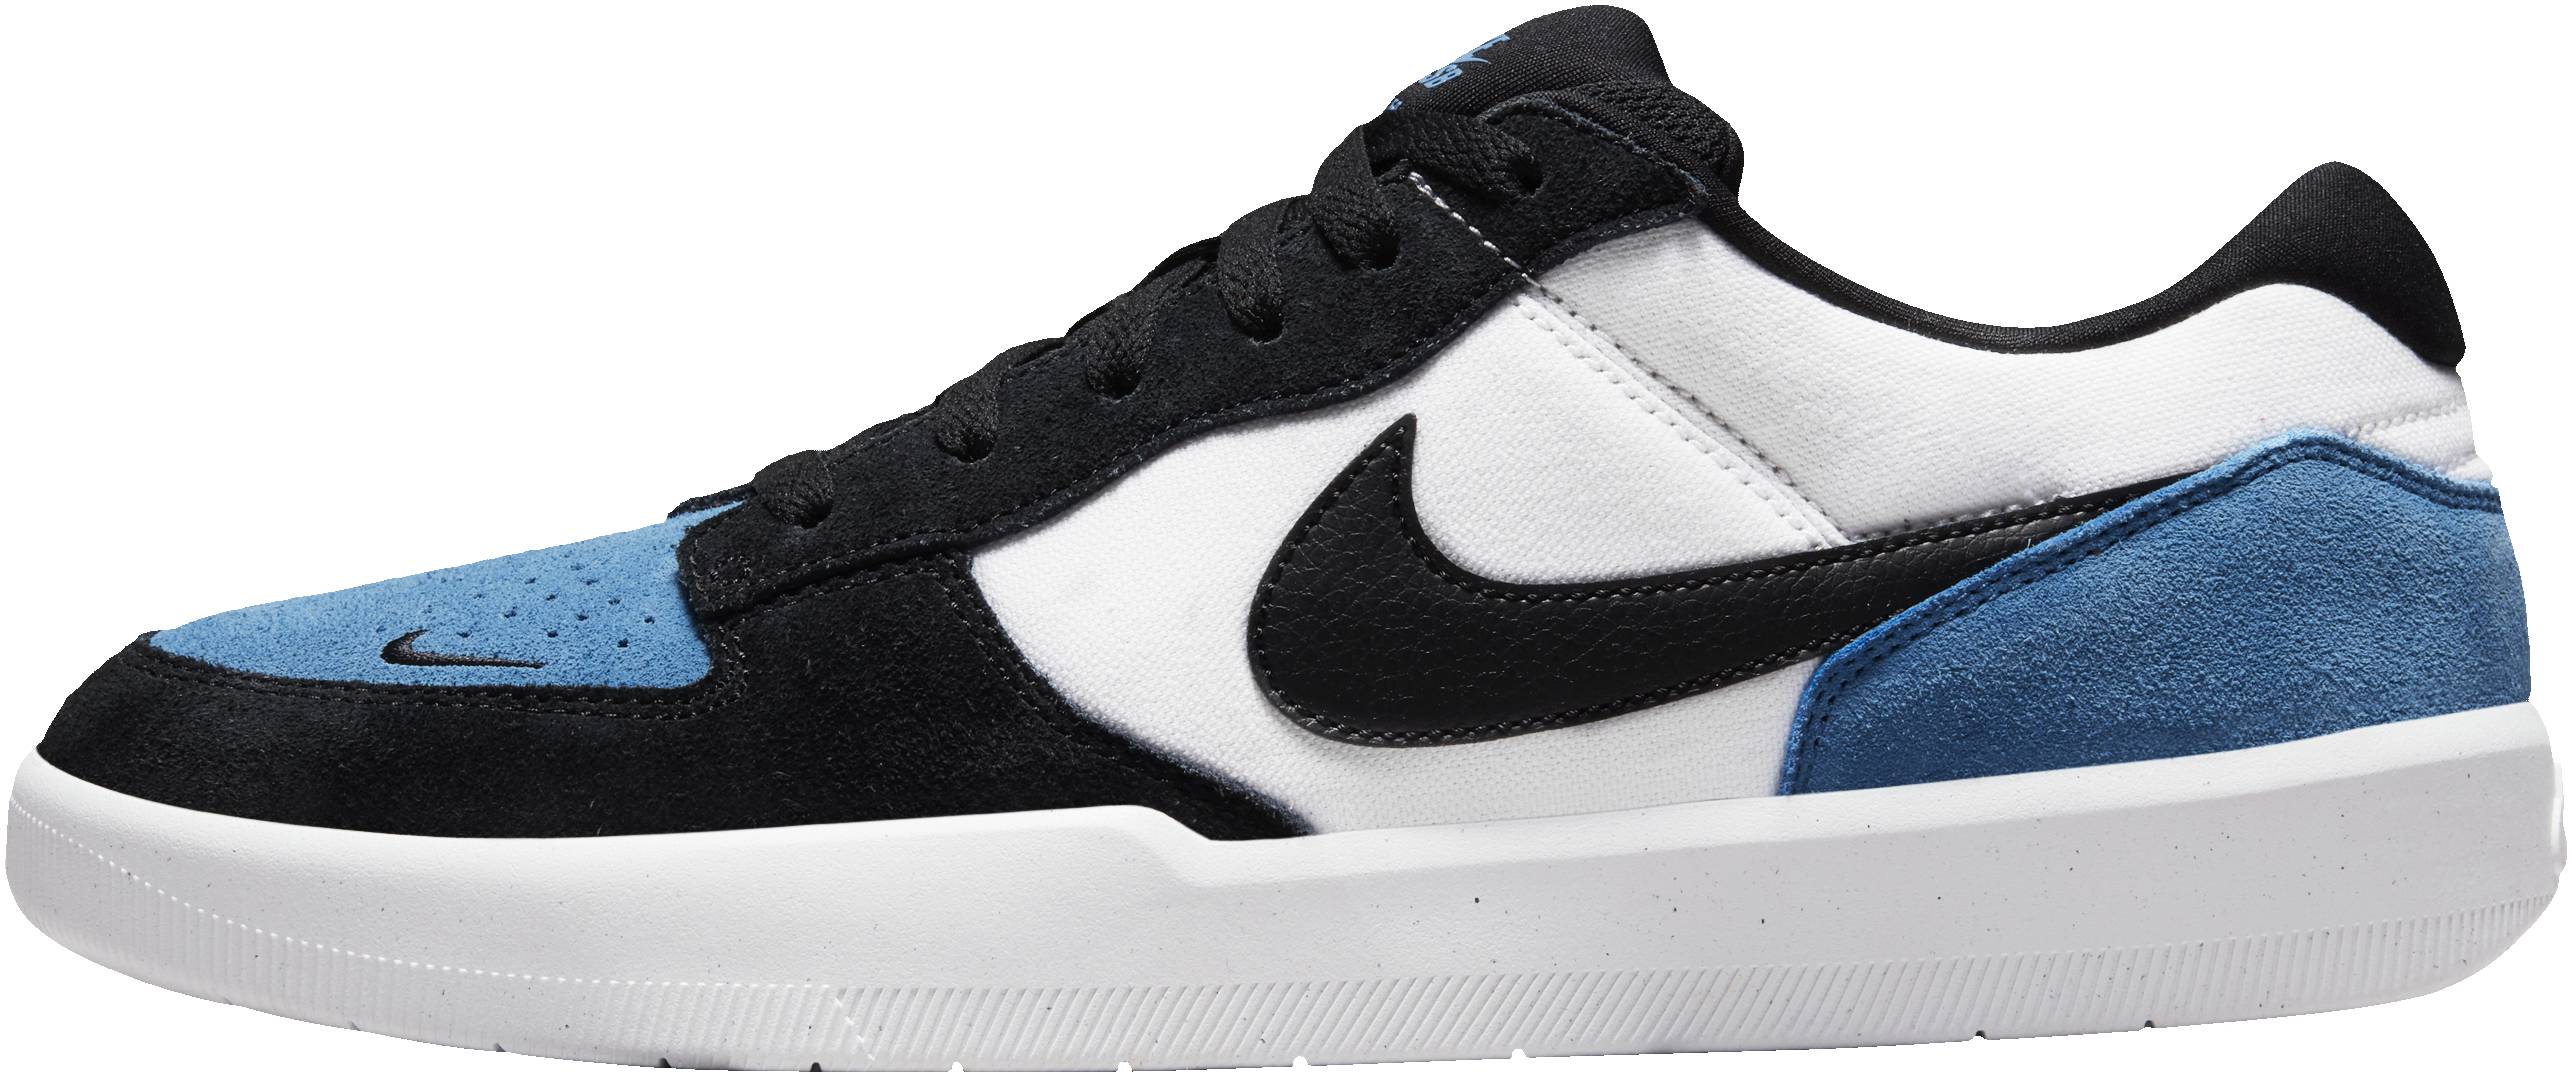 Nike SB Force 58 sneakers in 10+ colors (only $61) | RunRepeat